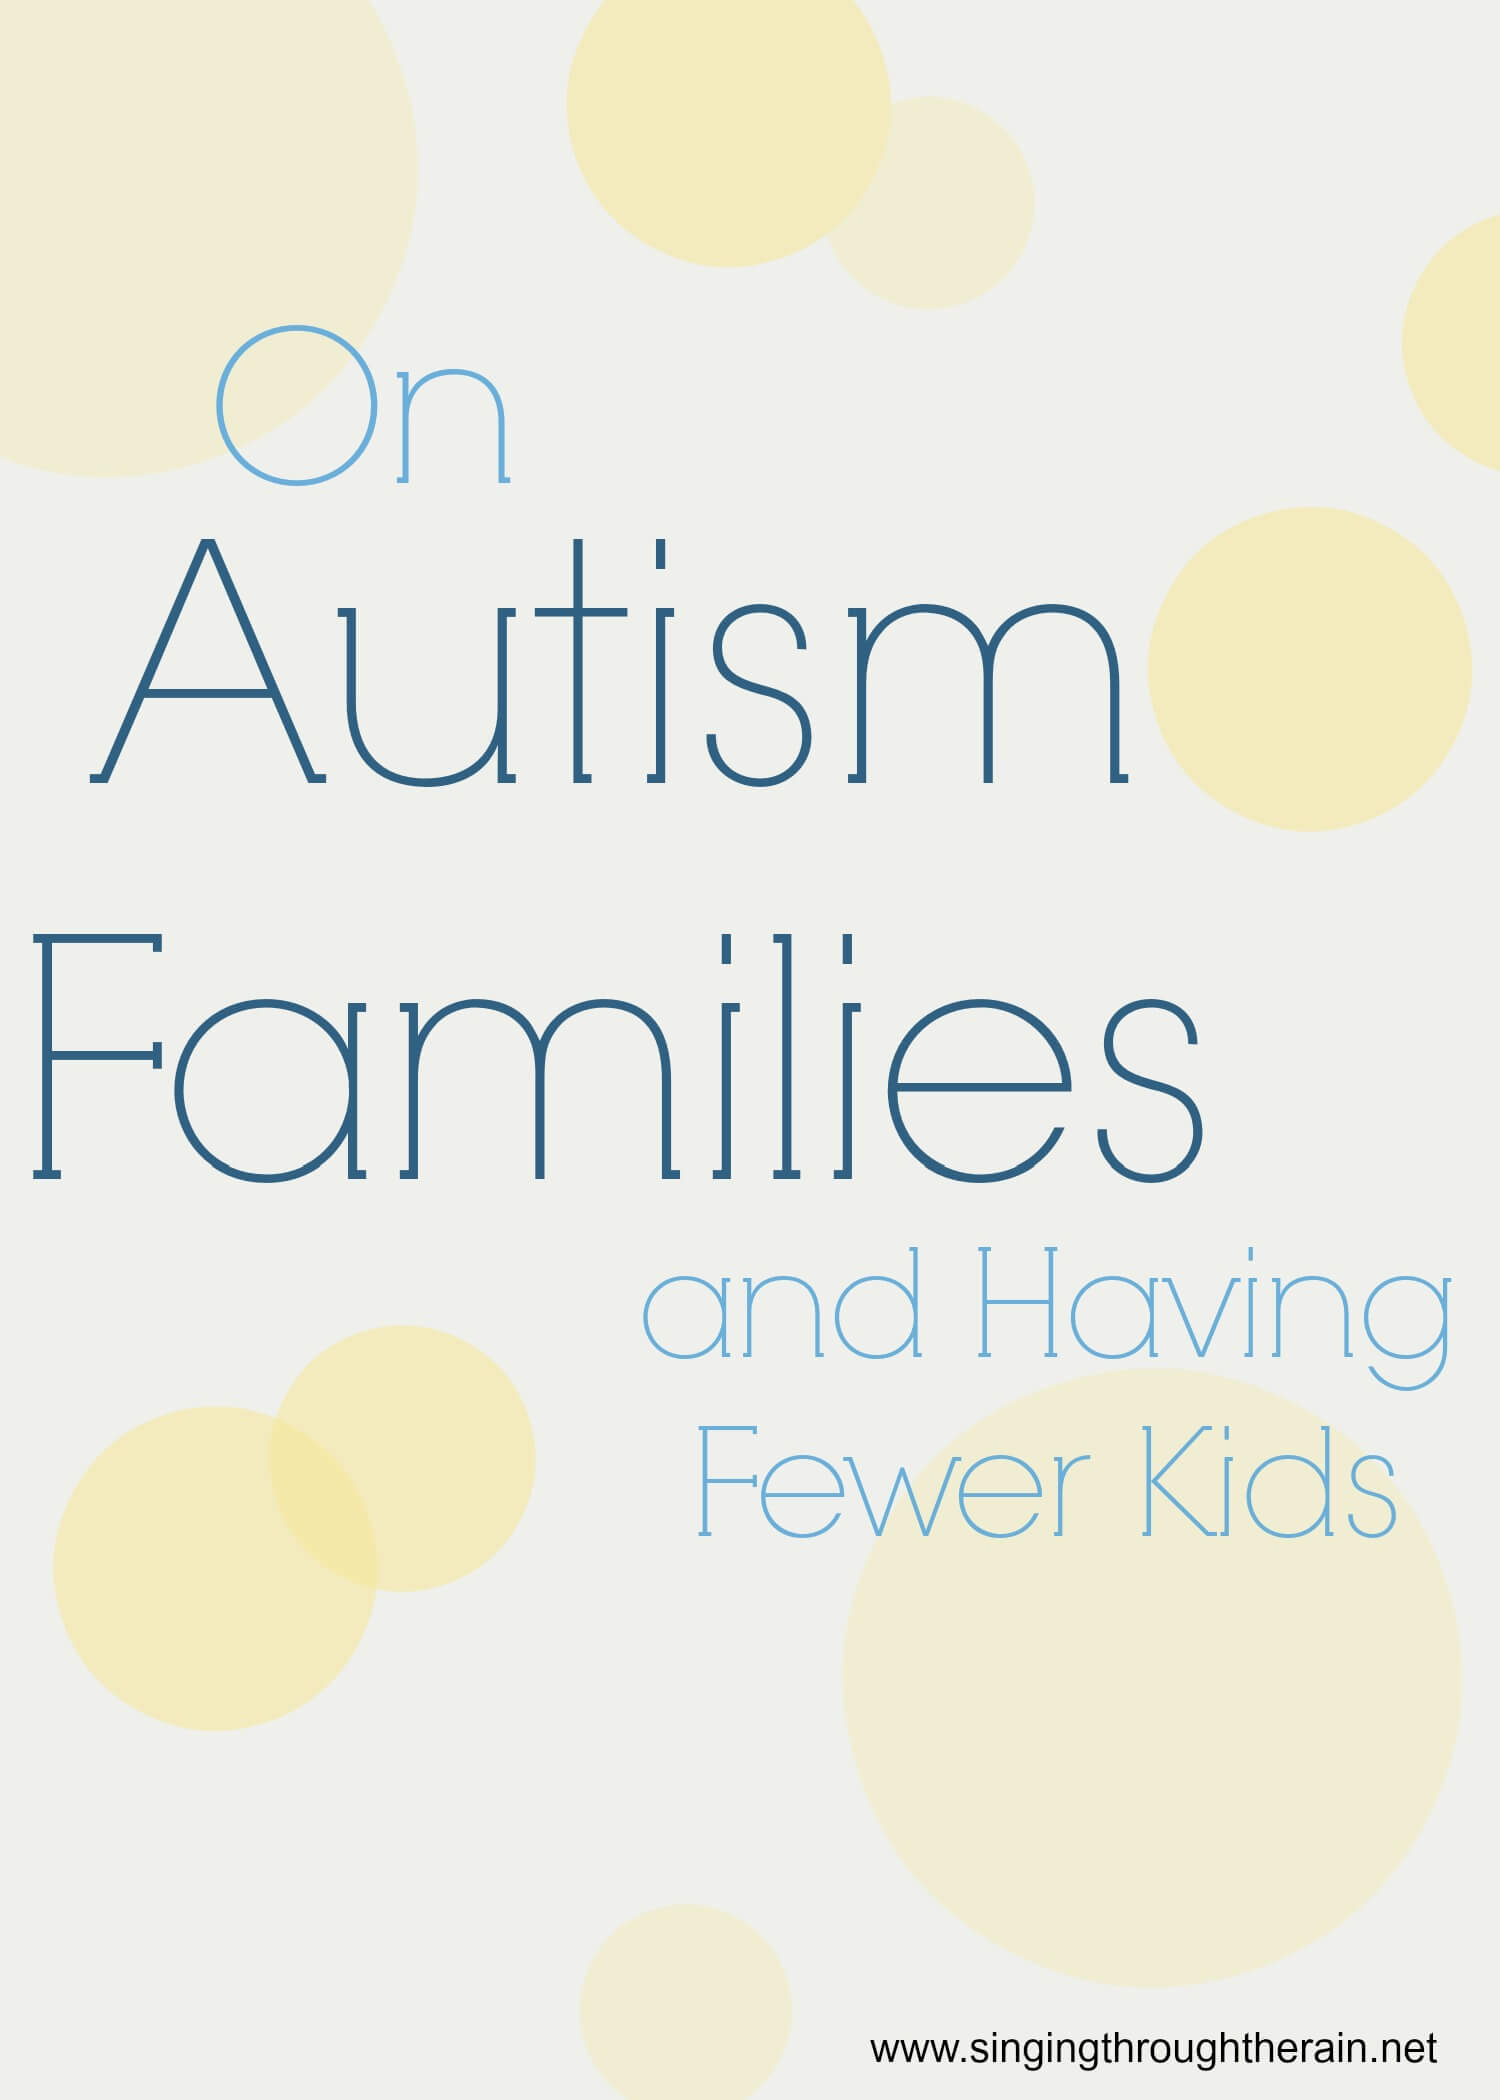 On Autism Families and Having Fewer Kids